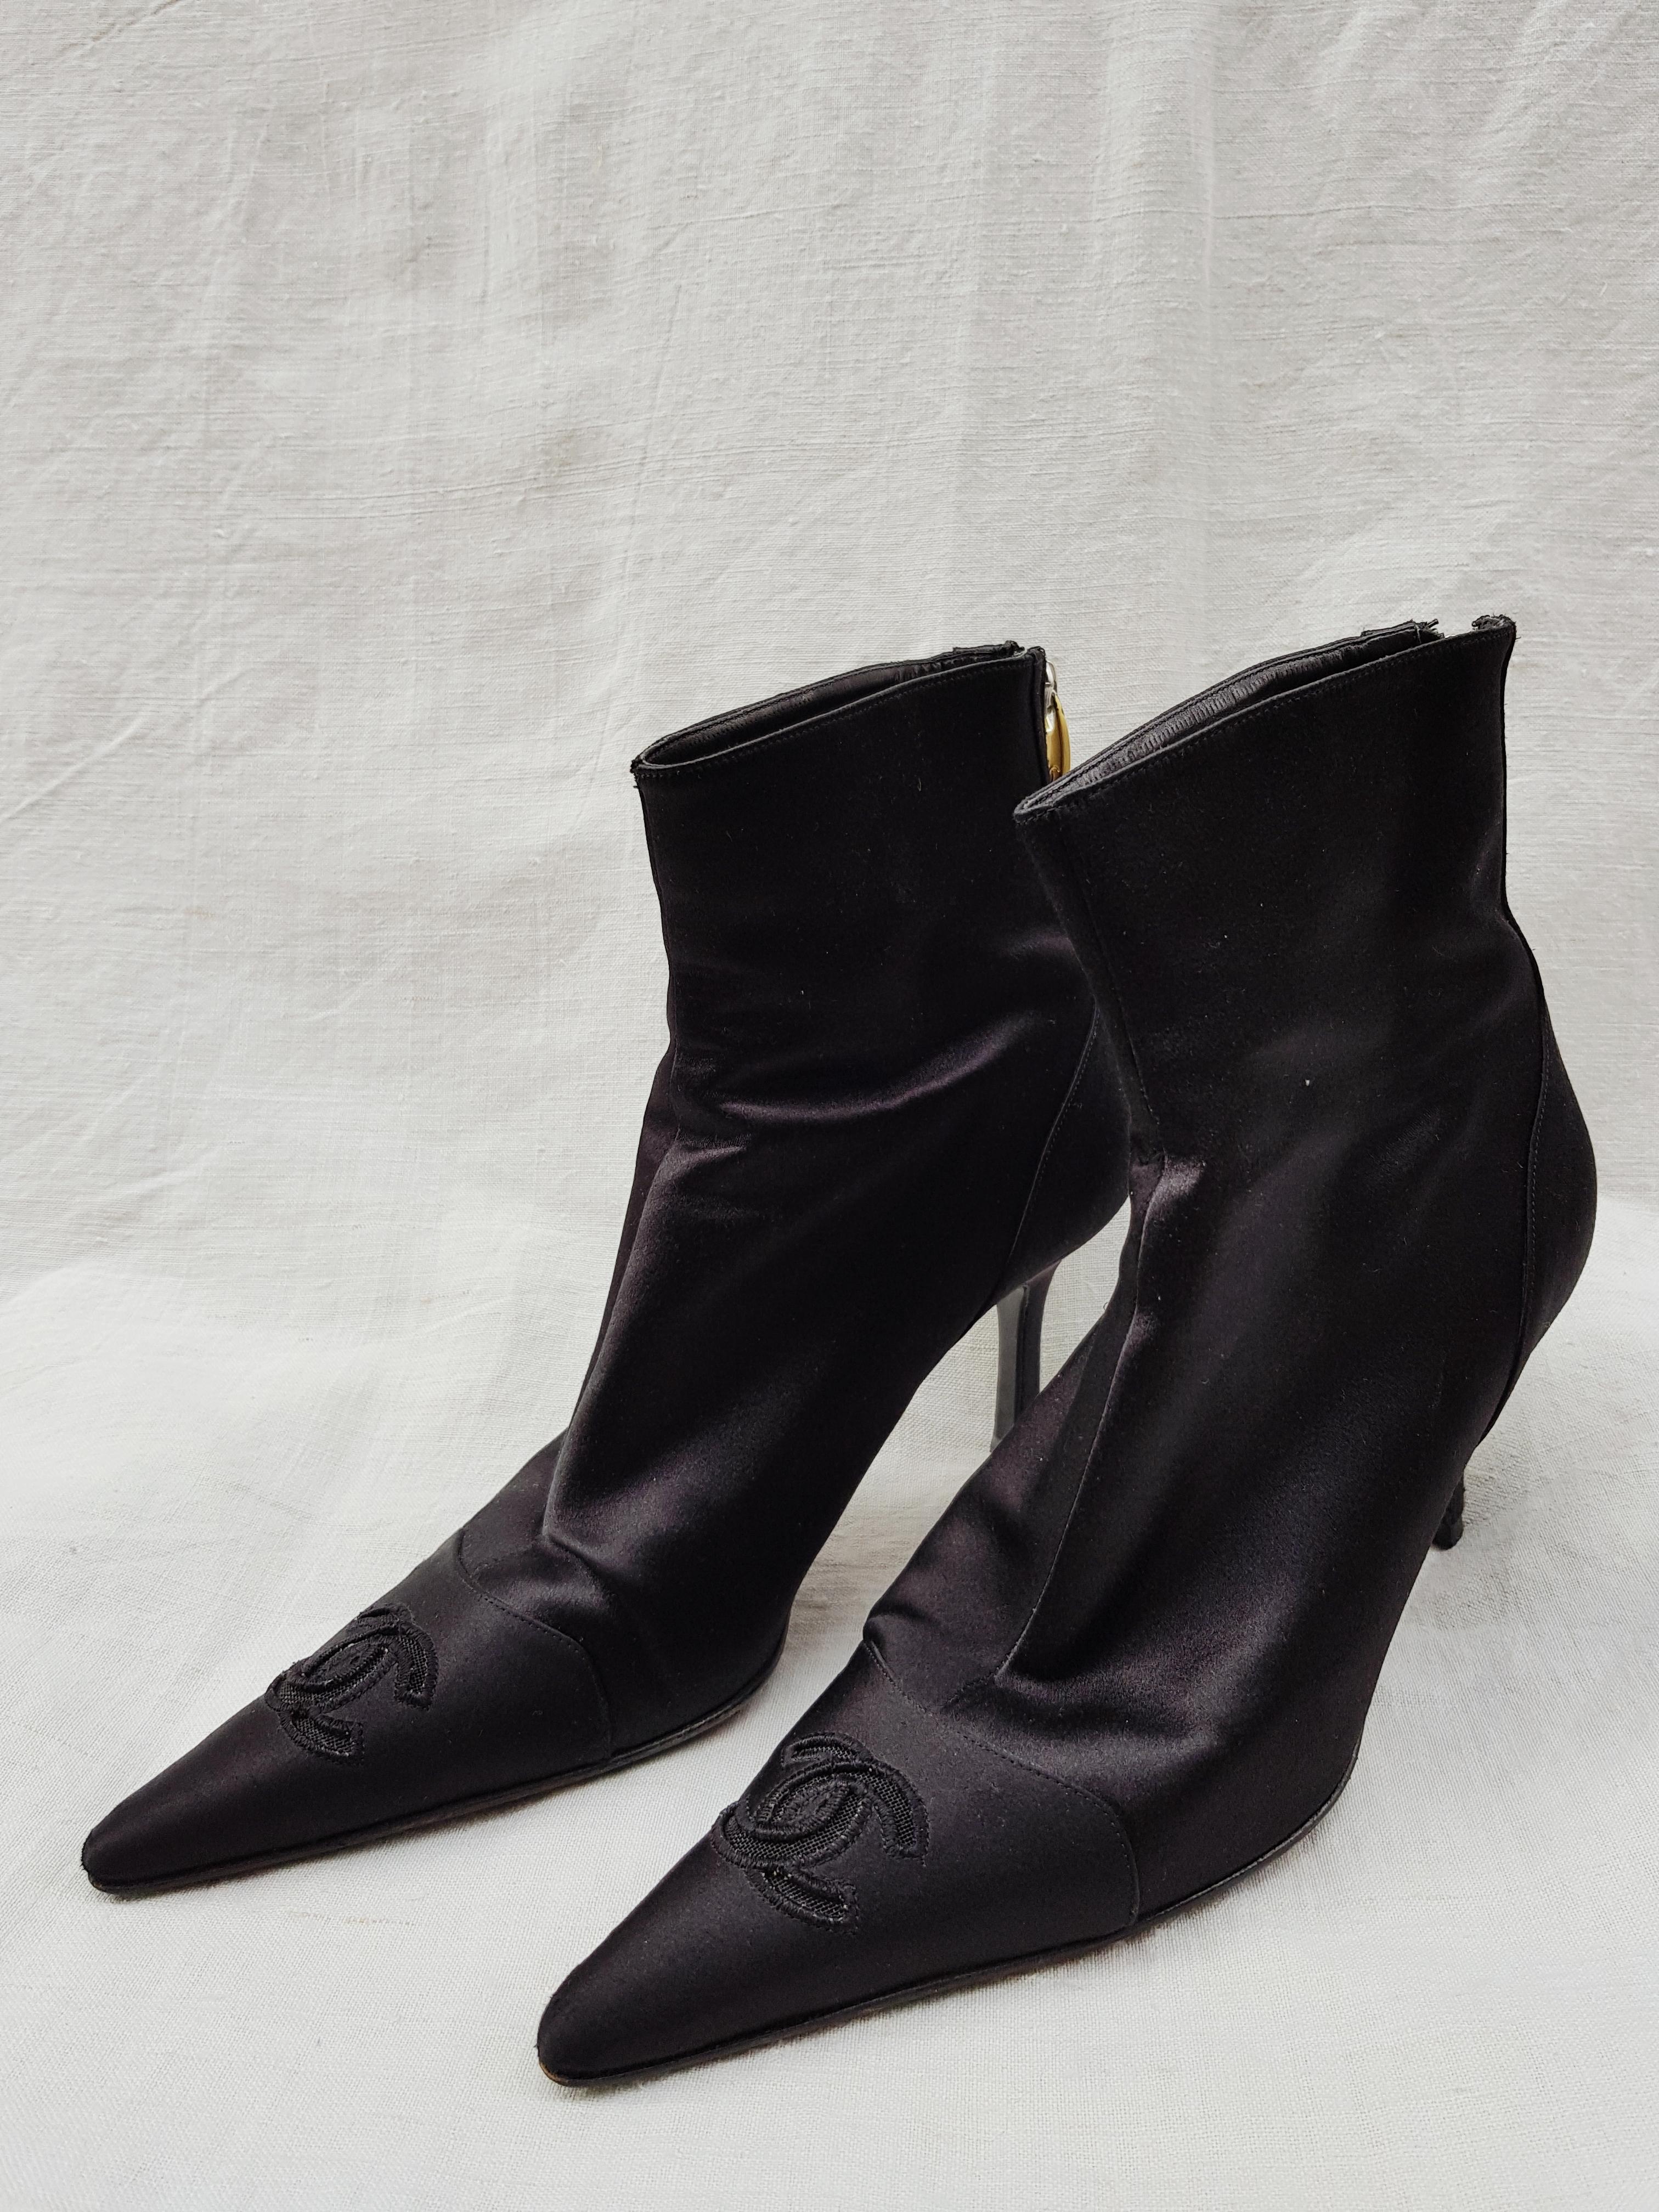 Women's CHANEL vintage black satin pointy ankle boots